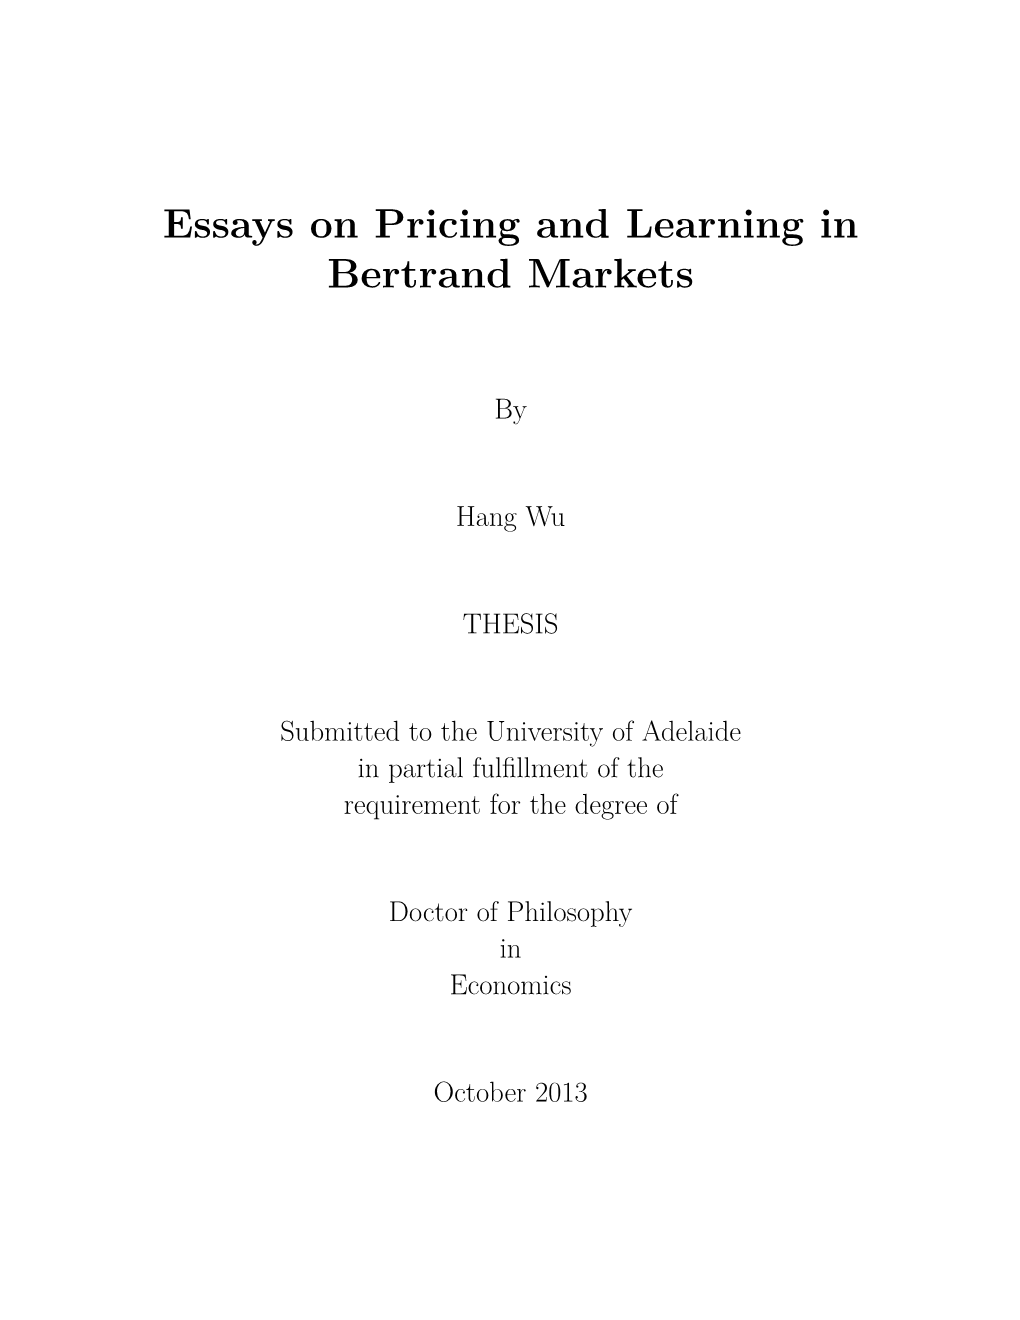 Essays on Pricing and Learning in Bertrand Markets